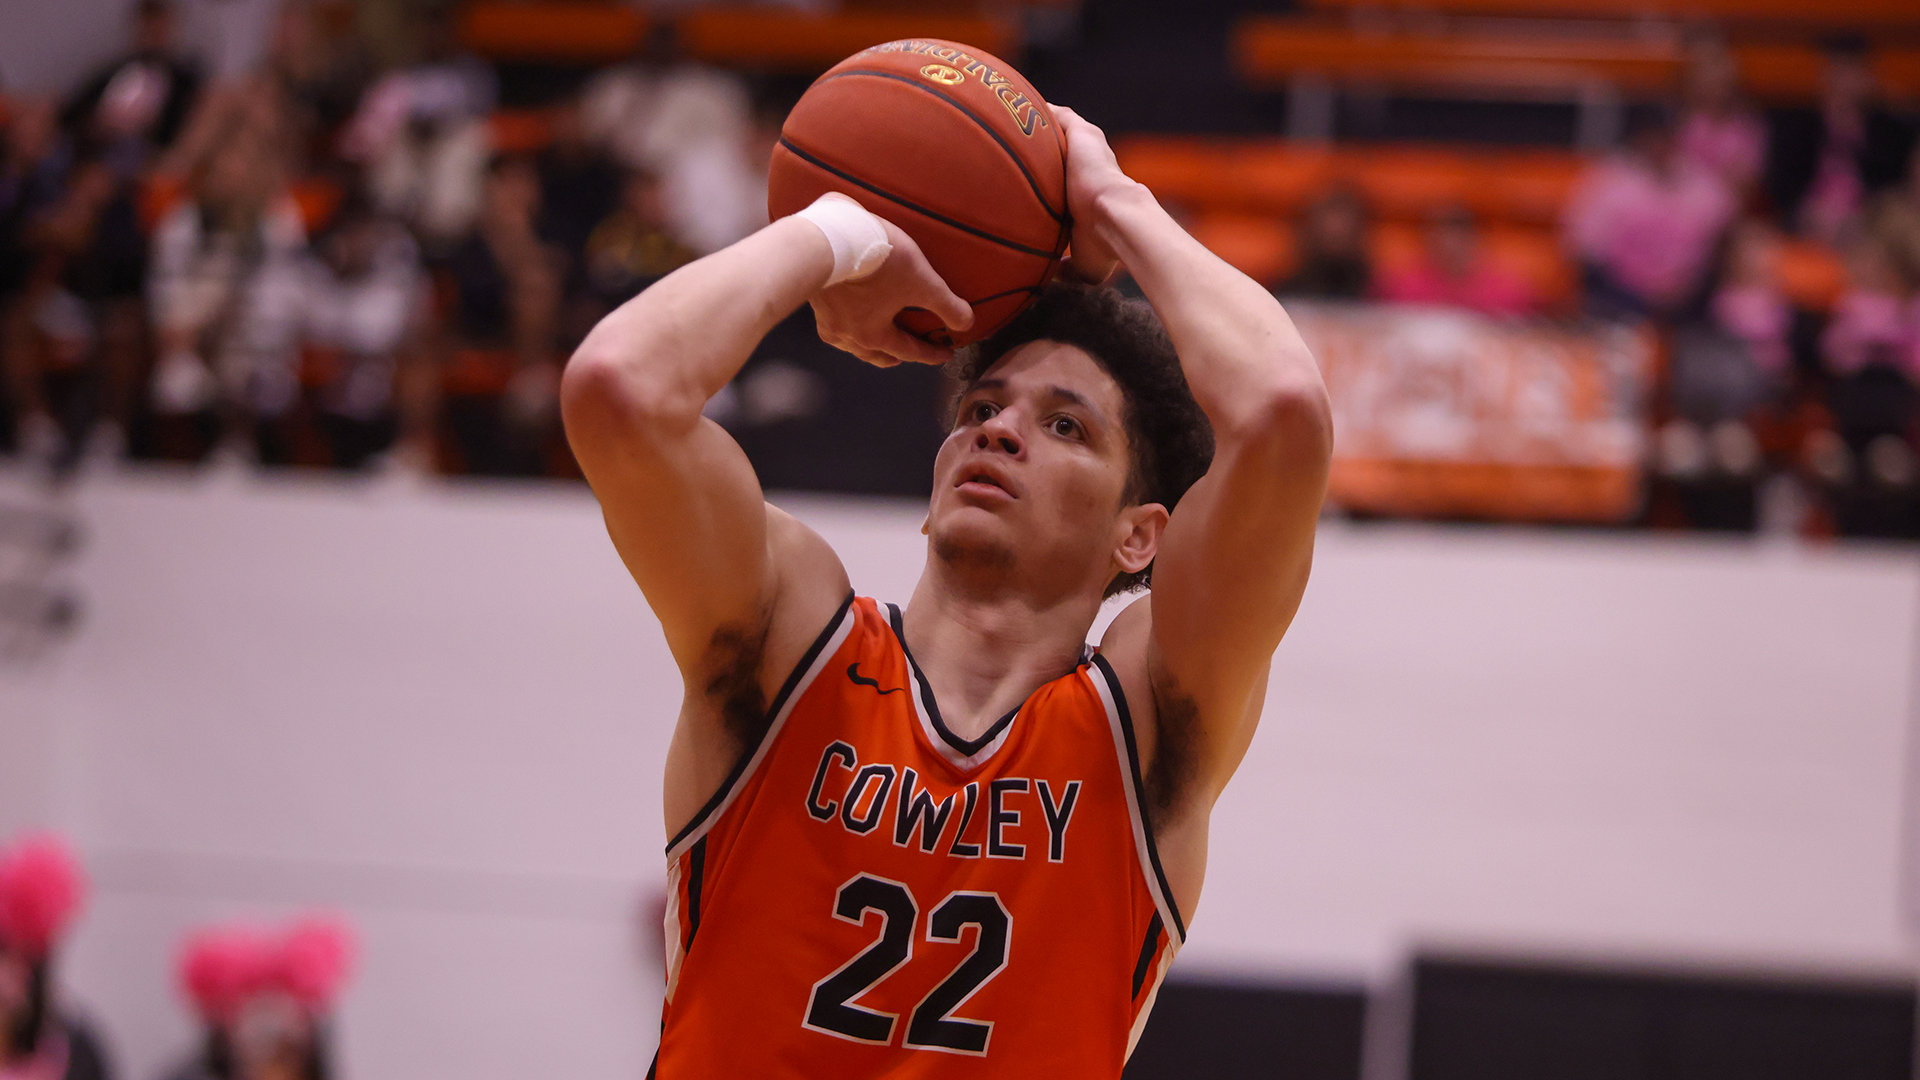 Smith?s last-second basket lifts Hutchinson to an 88-86 win at Cowley